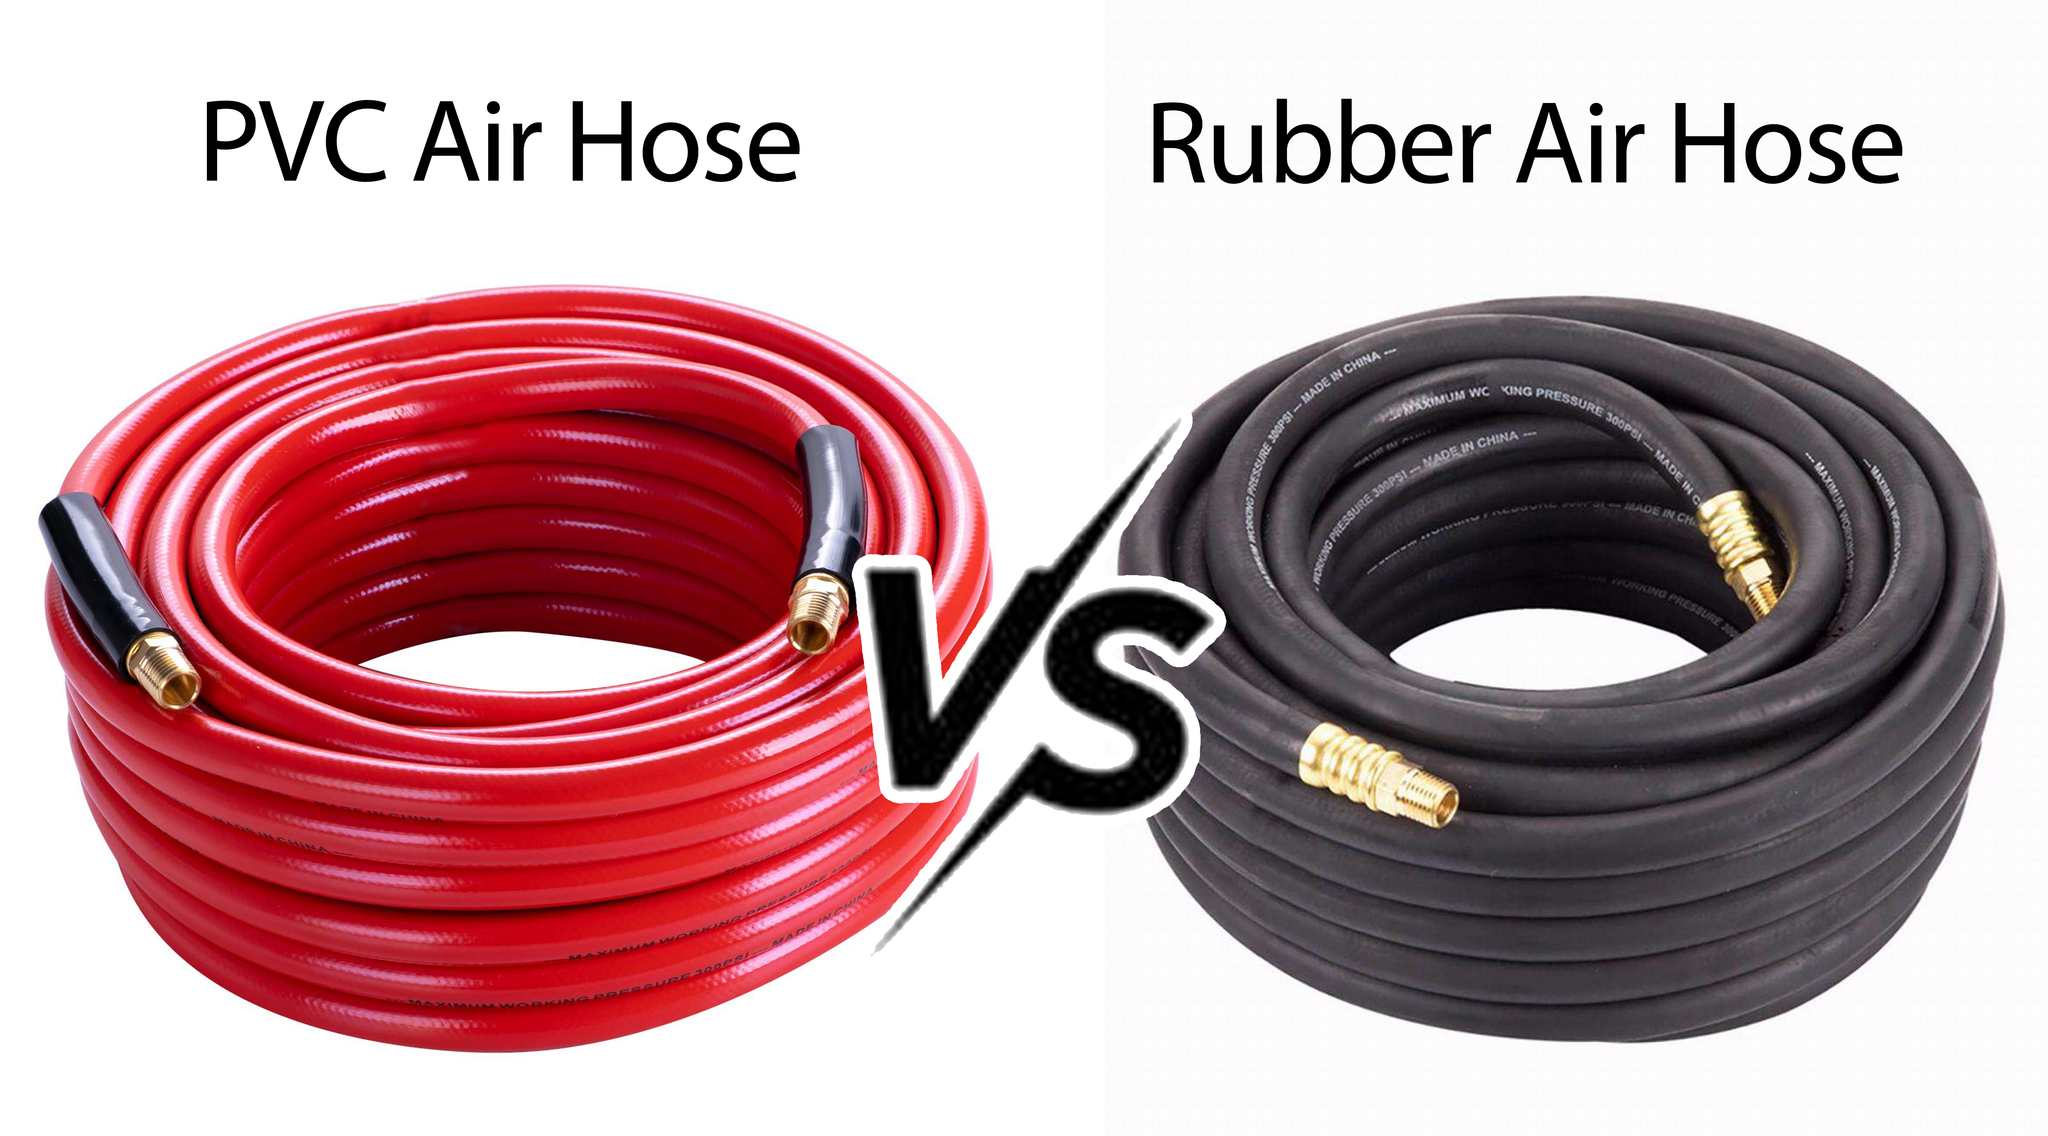 PVC vs. Rubber Air Hose: What's the Difference?